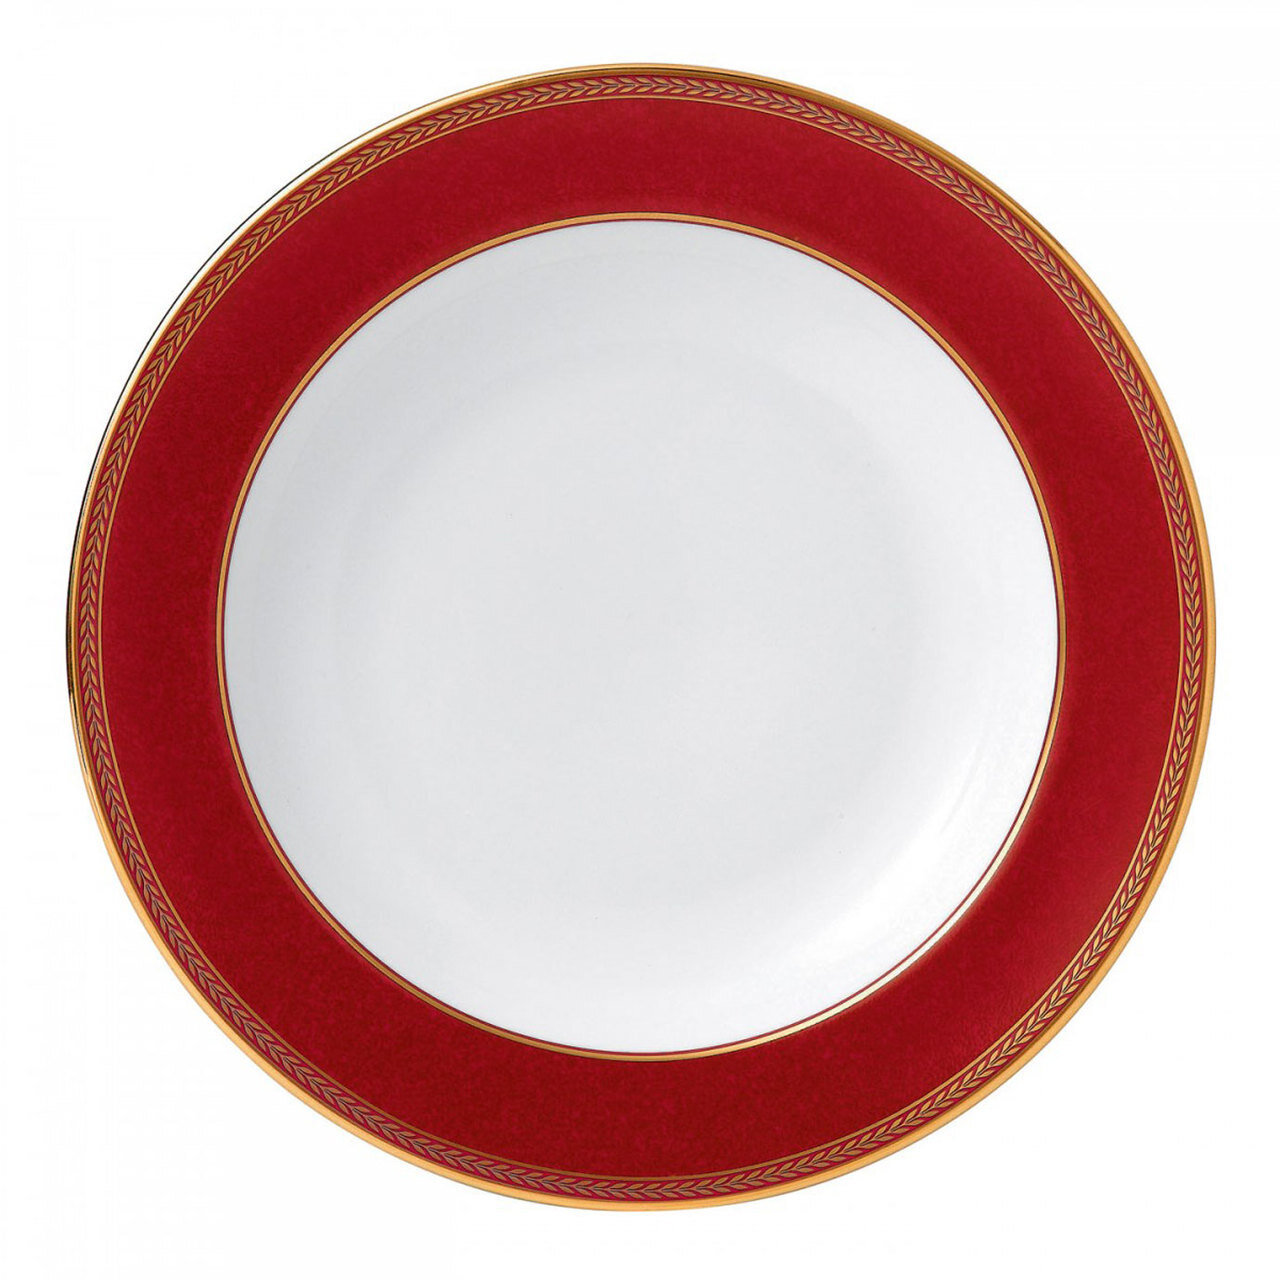 Wedgwood Renaissance Red Rim Soup Plate 9 Inch